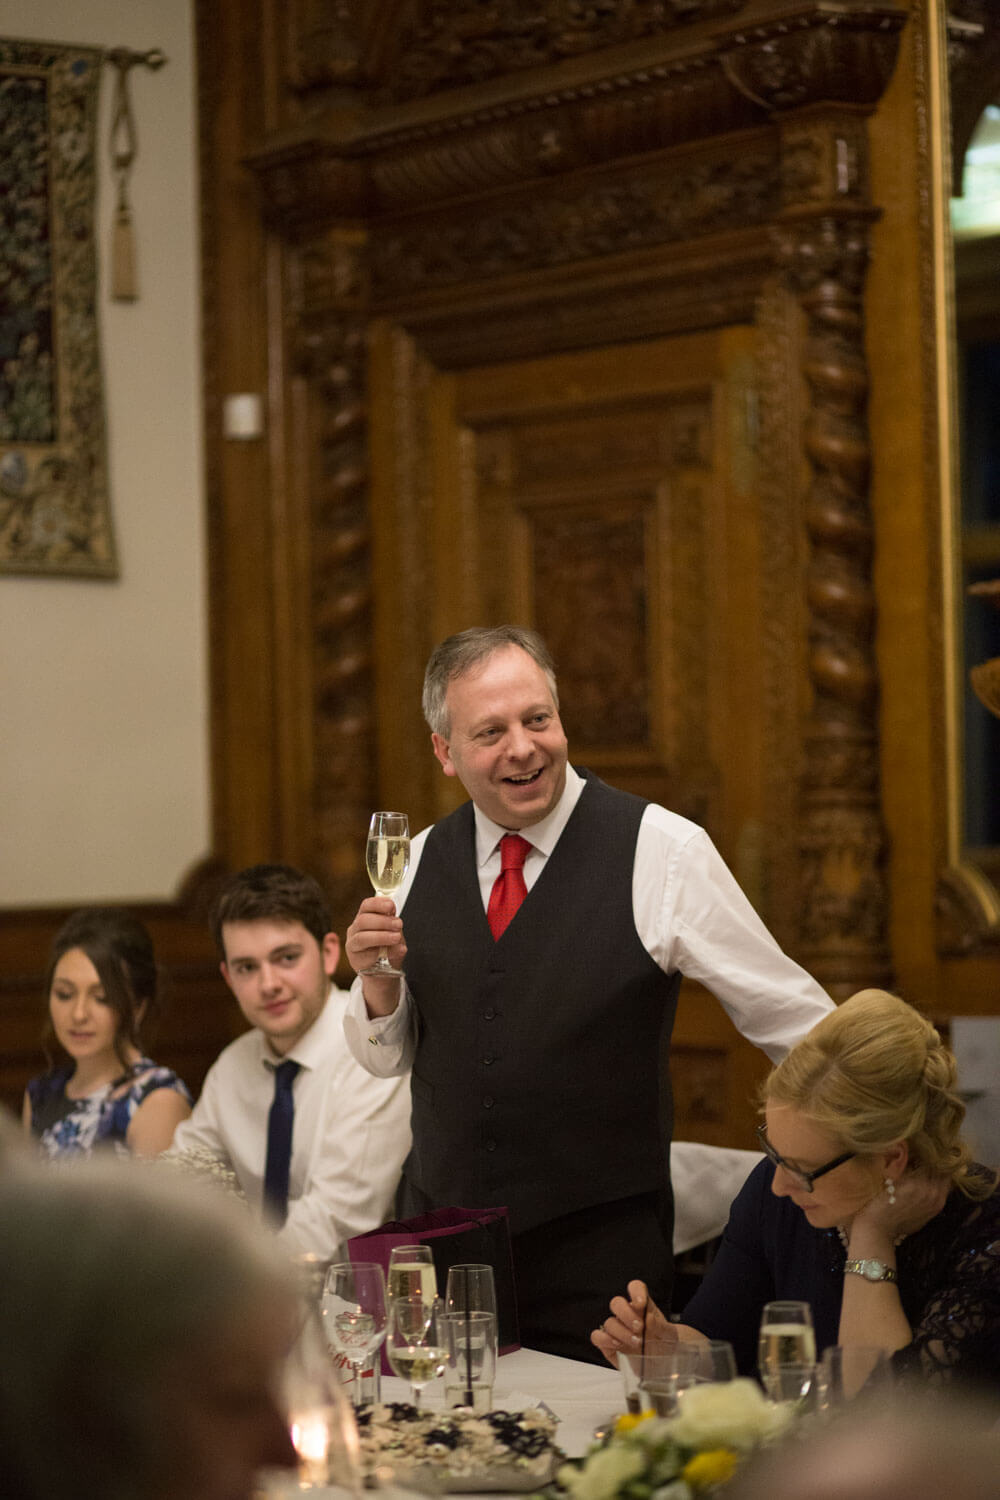 smiling man stands holding a glass of champagne as he makes a speech at the wedding breakfast table